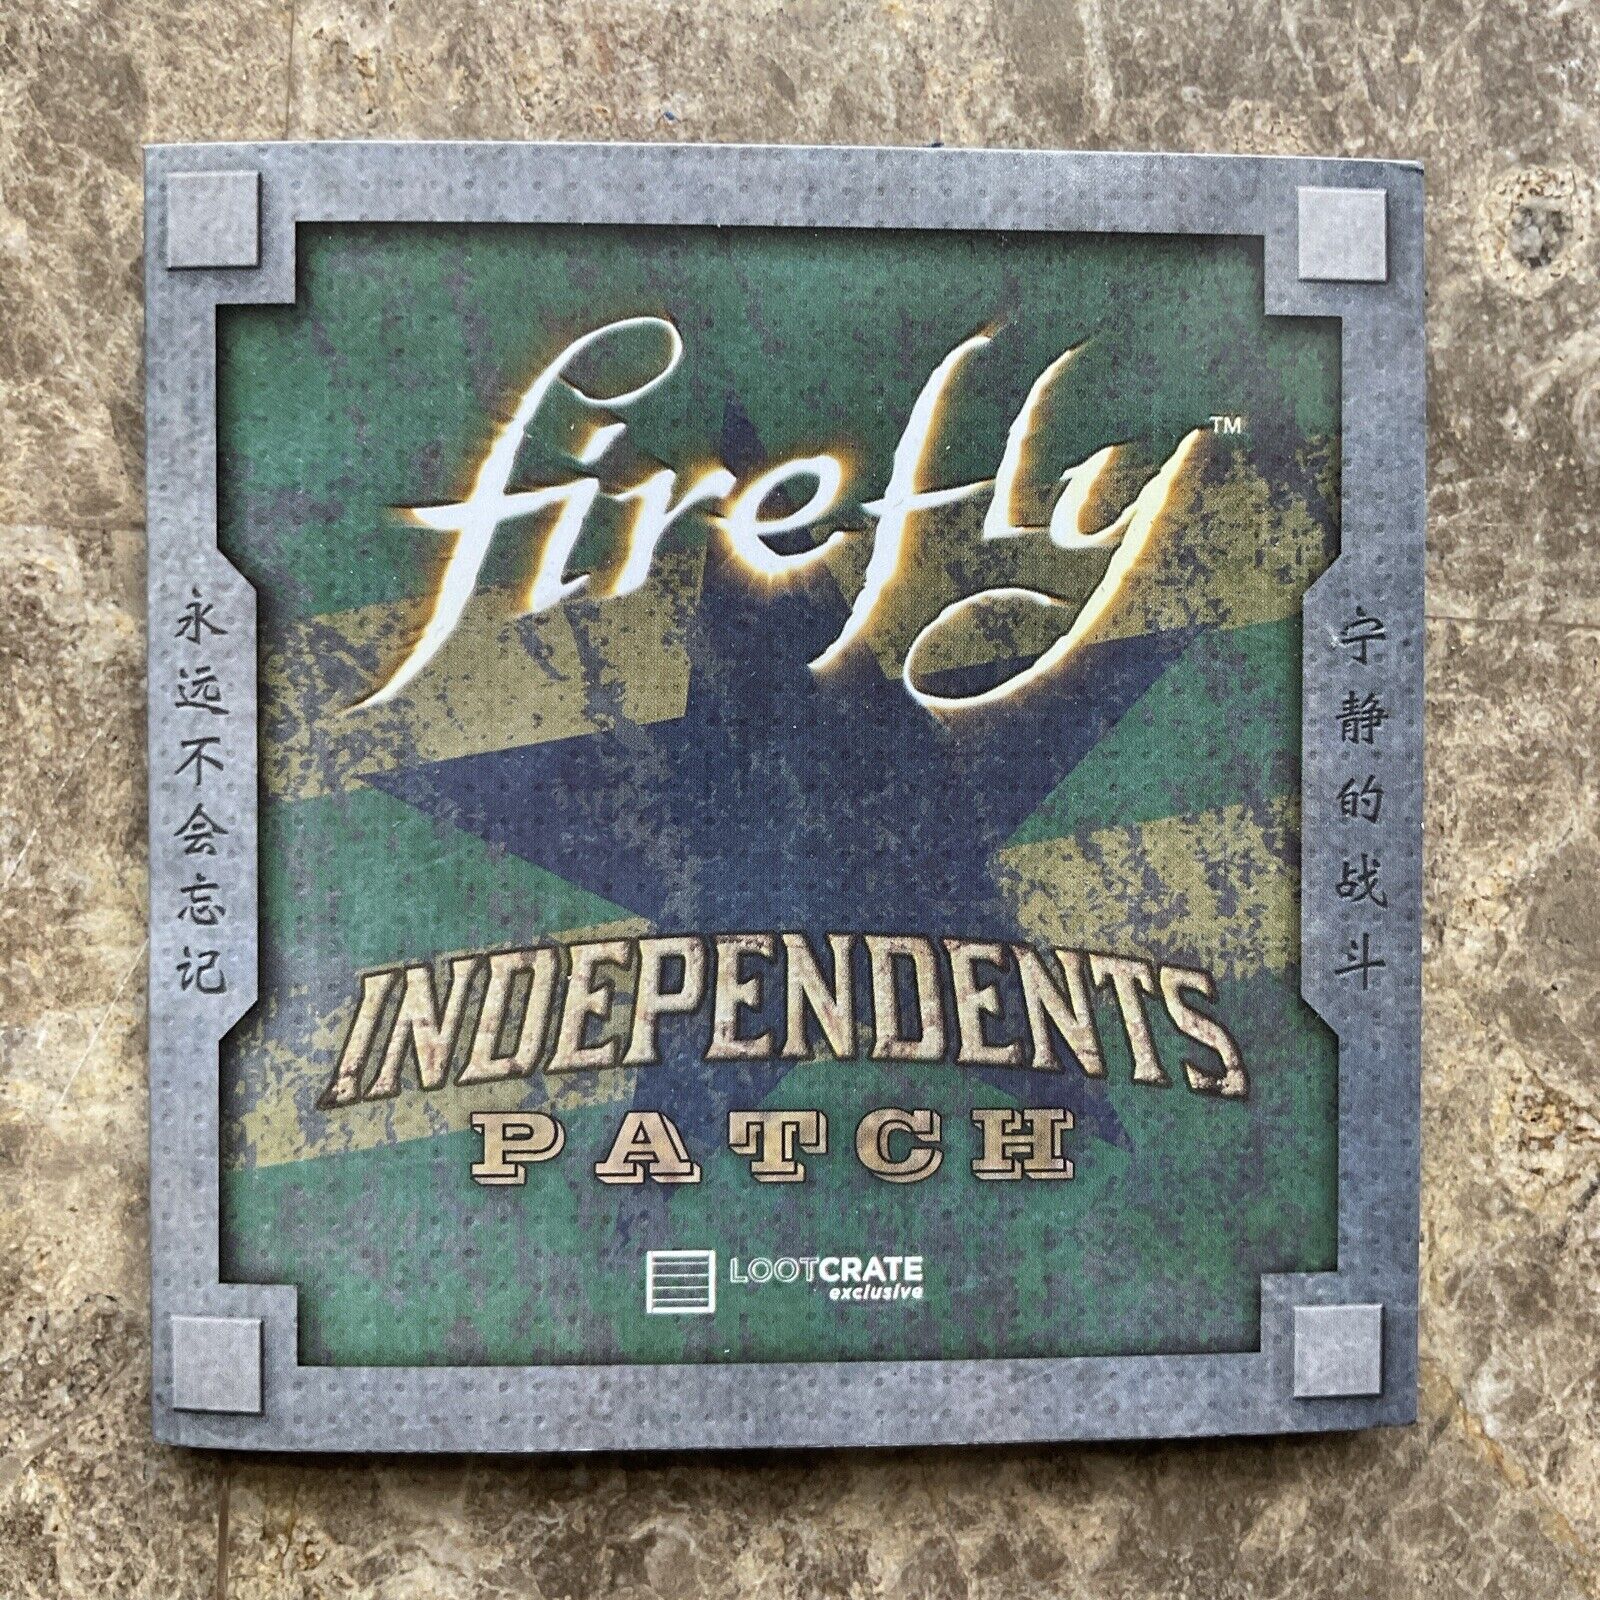 Firefly Independents Patch 3” Loot Crate Exclusive Brand New with Sleeve 2016